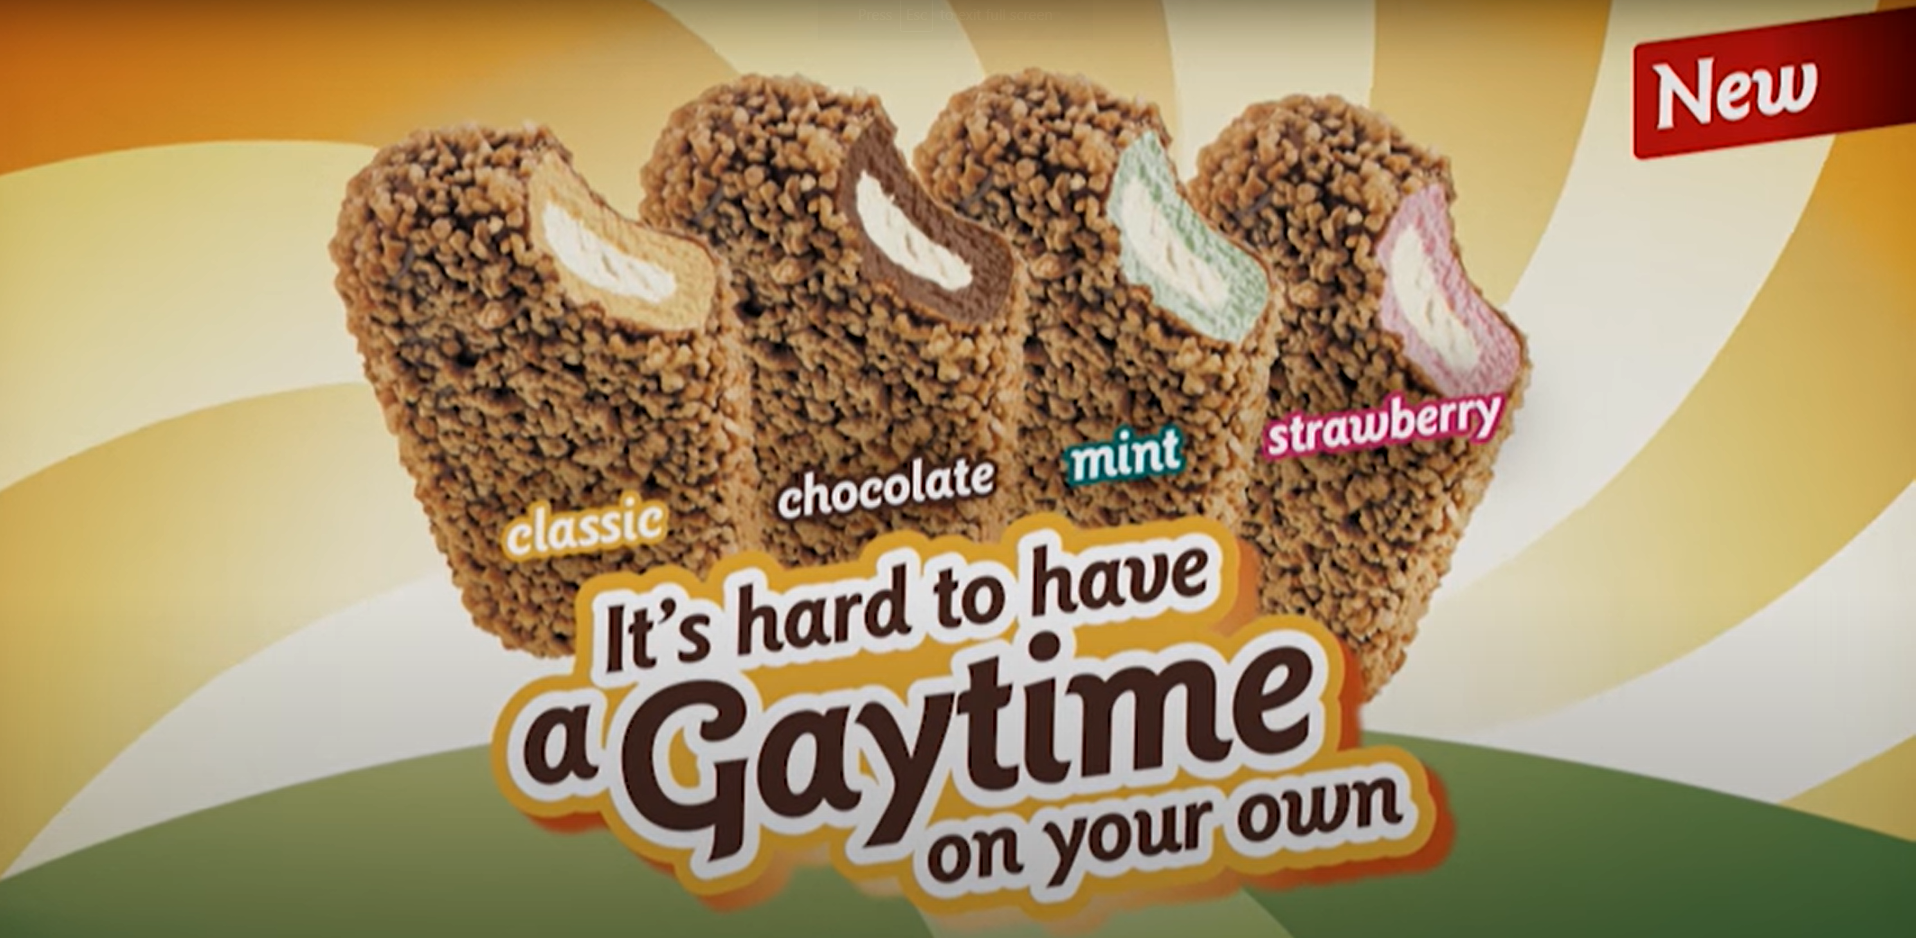 It's An Ice Cream, Hun": LGBTQIA+ Community Hits At Suggestion Golden Gaytime Ice-Cream 'Offensive' - B&T